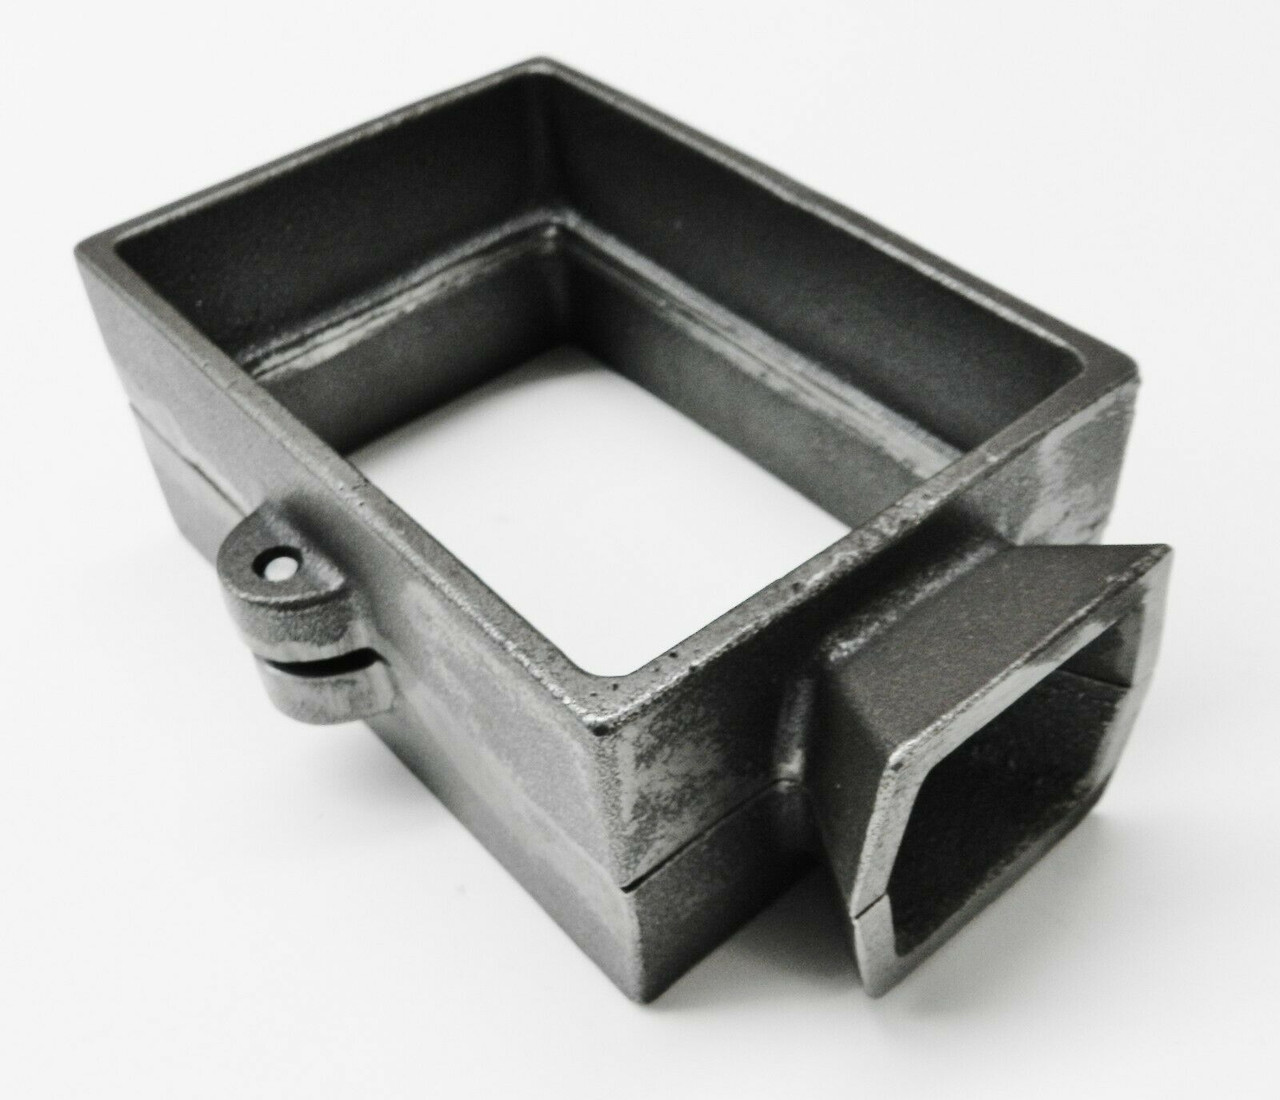 Mold for metal casting  Metal casting, It cast, Stone molds